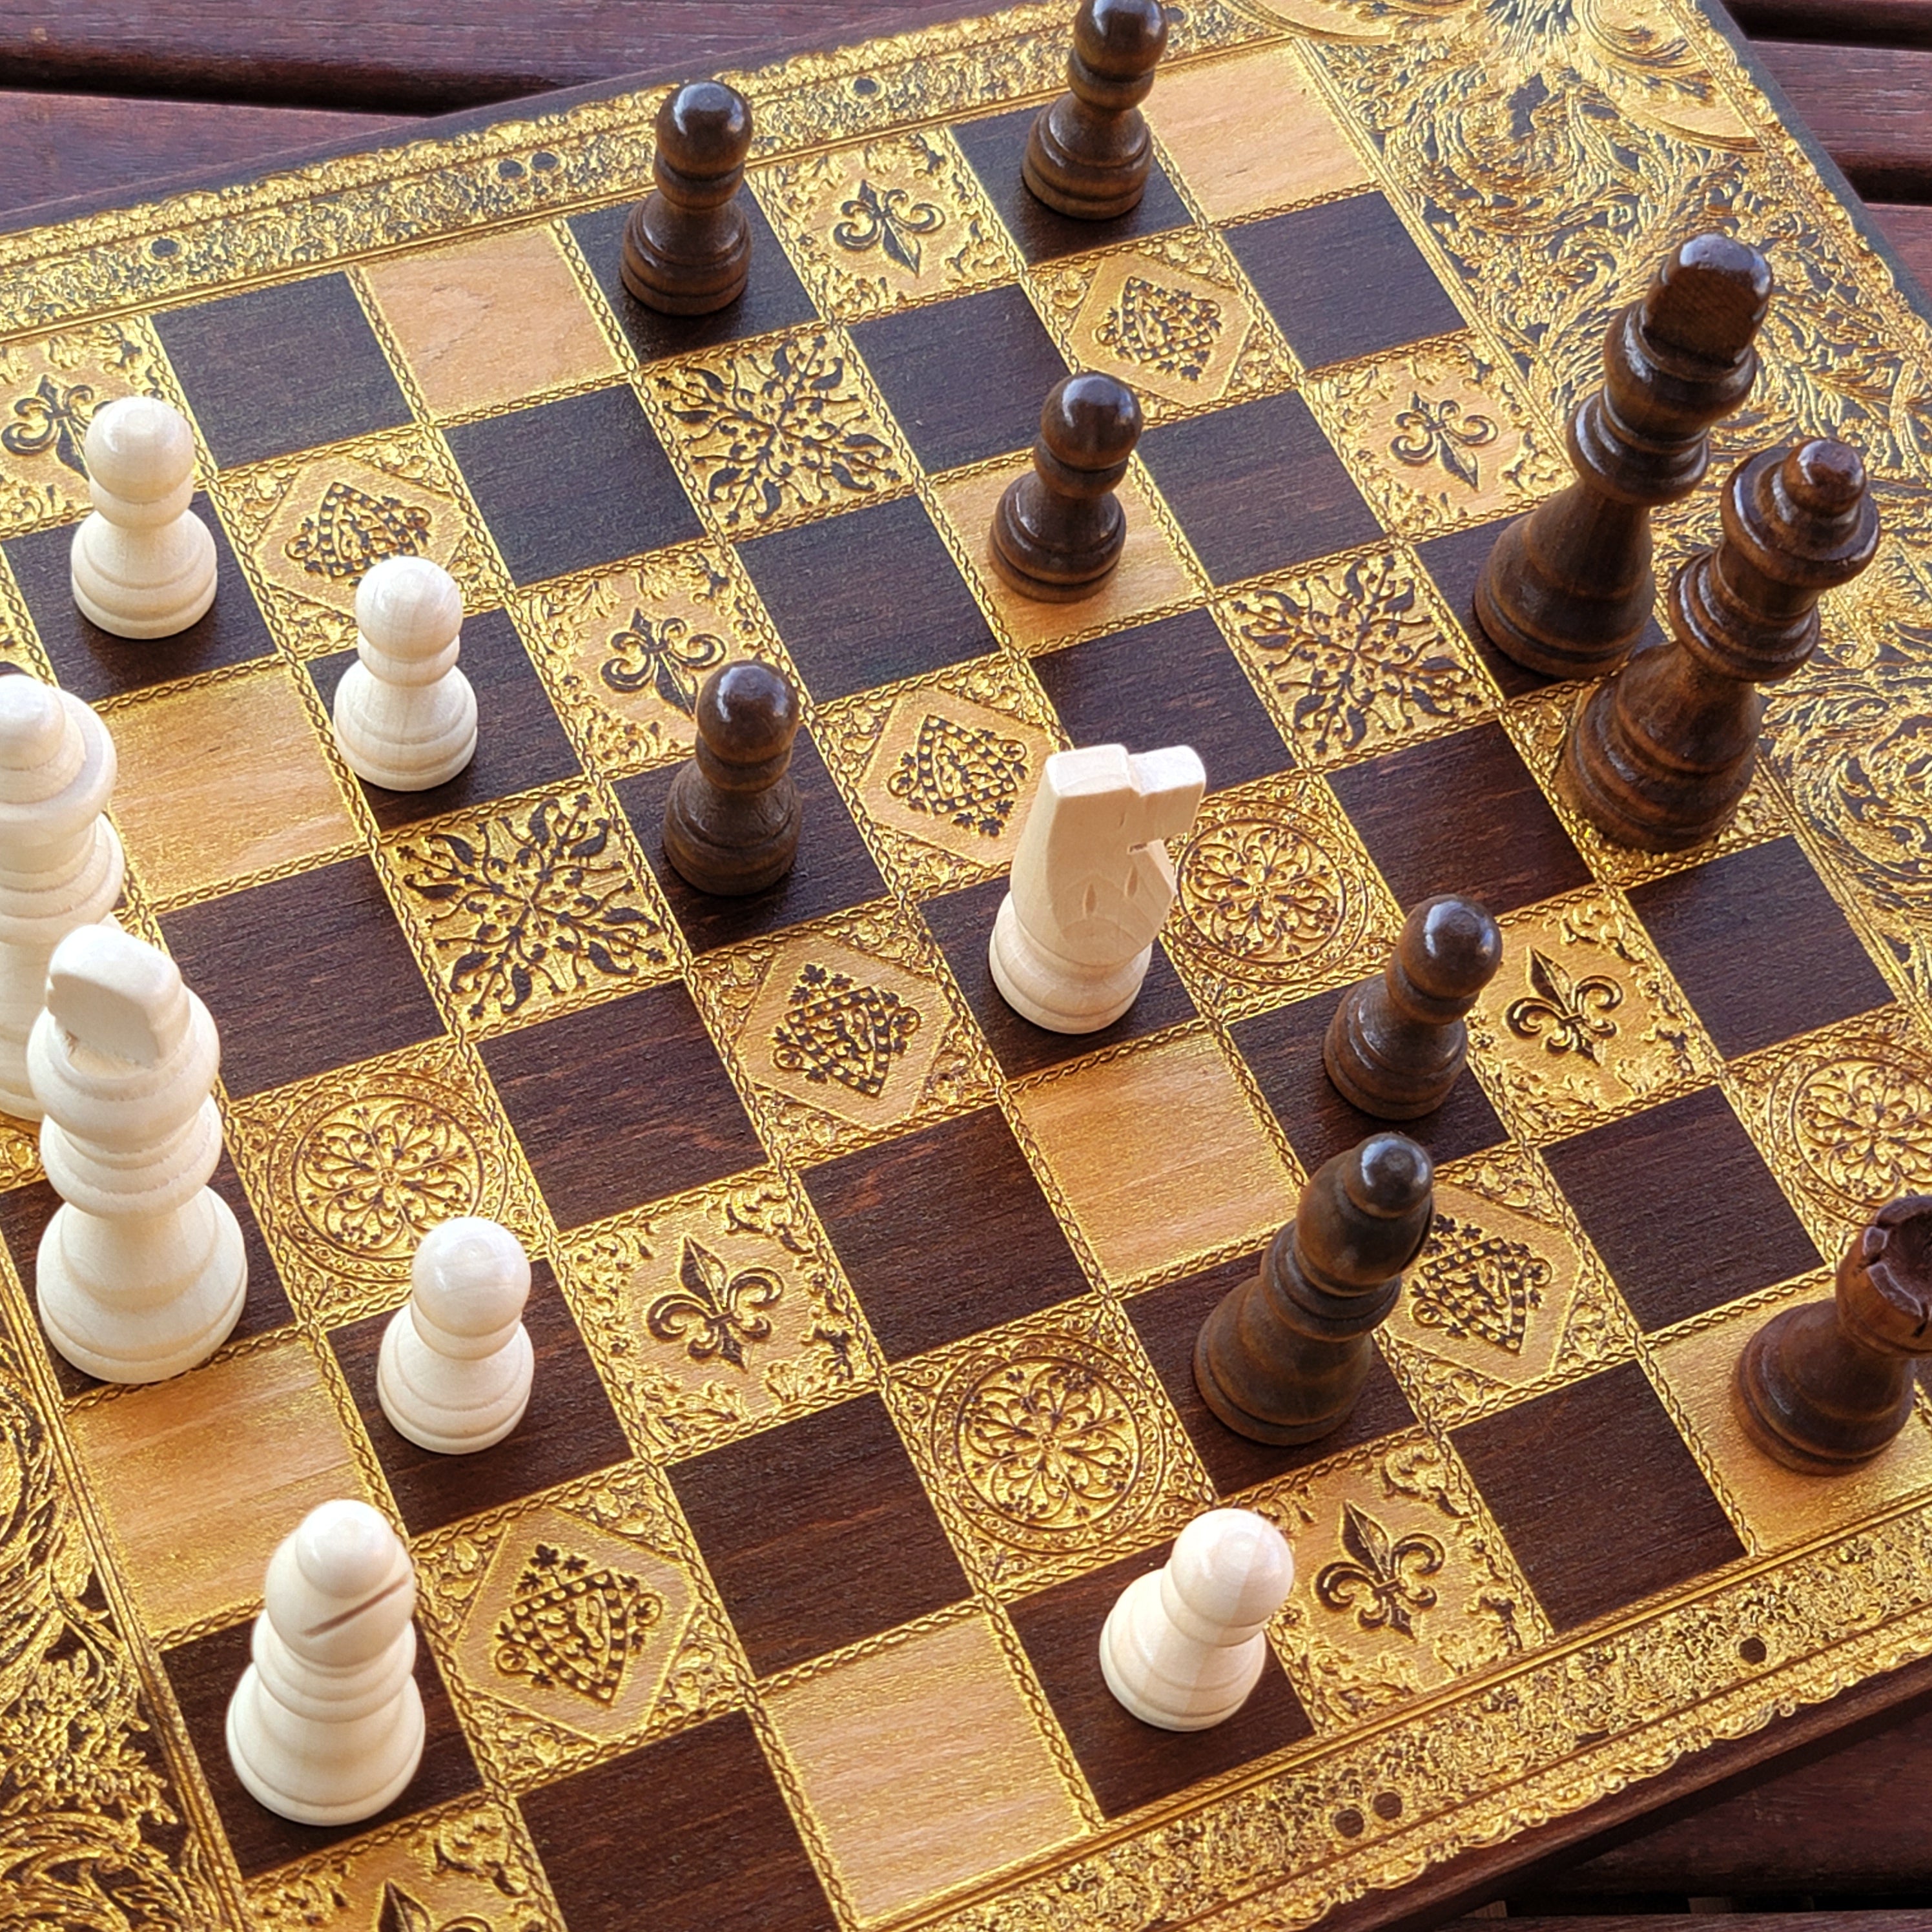 Battle Walnut & Gold Stained Wooden Chess Board Game Set - A3 Size - 1.25" / 32 mm Square